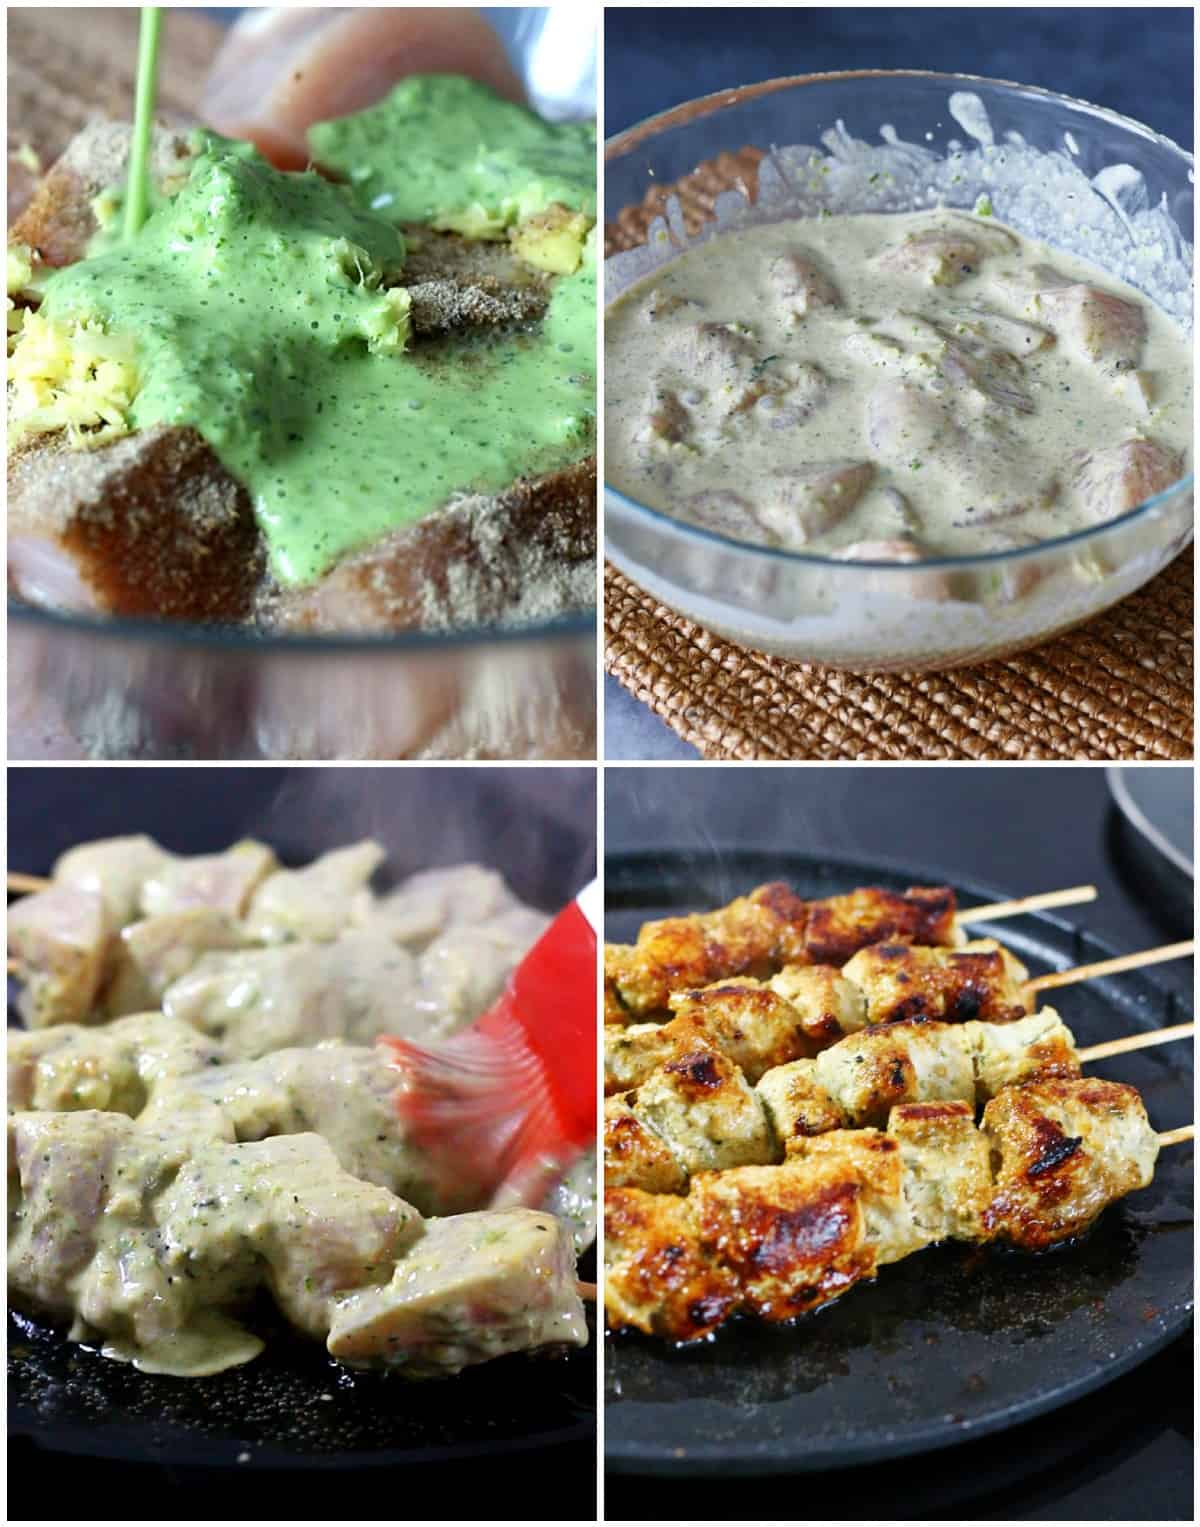 Step by step instructions for making chicken malai boti.